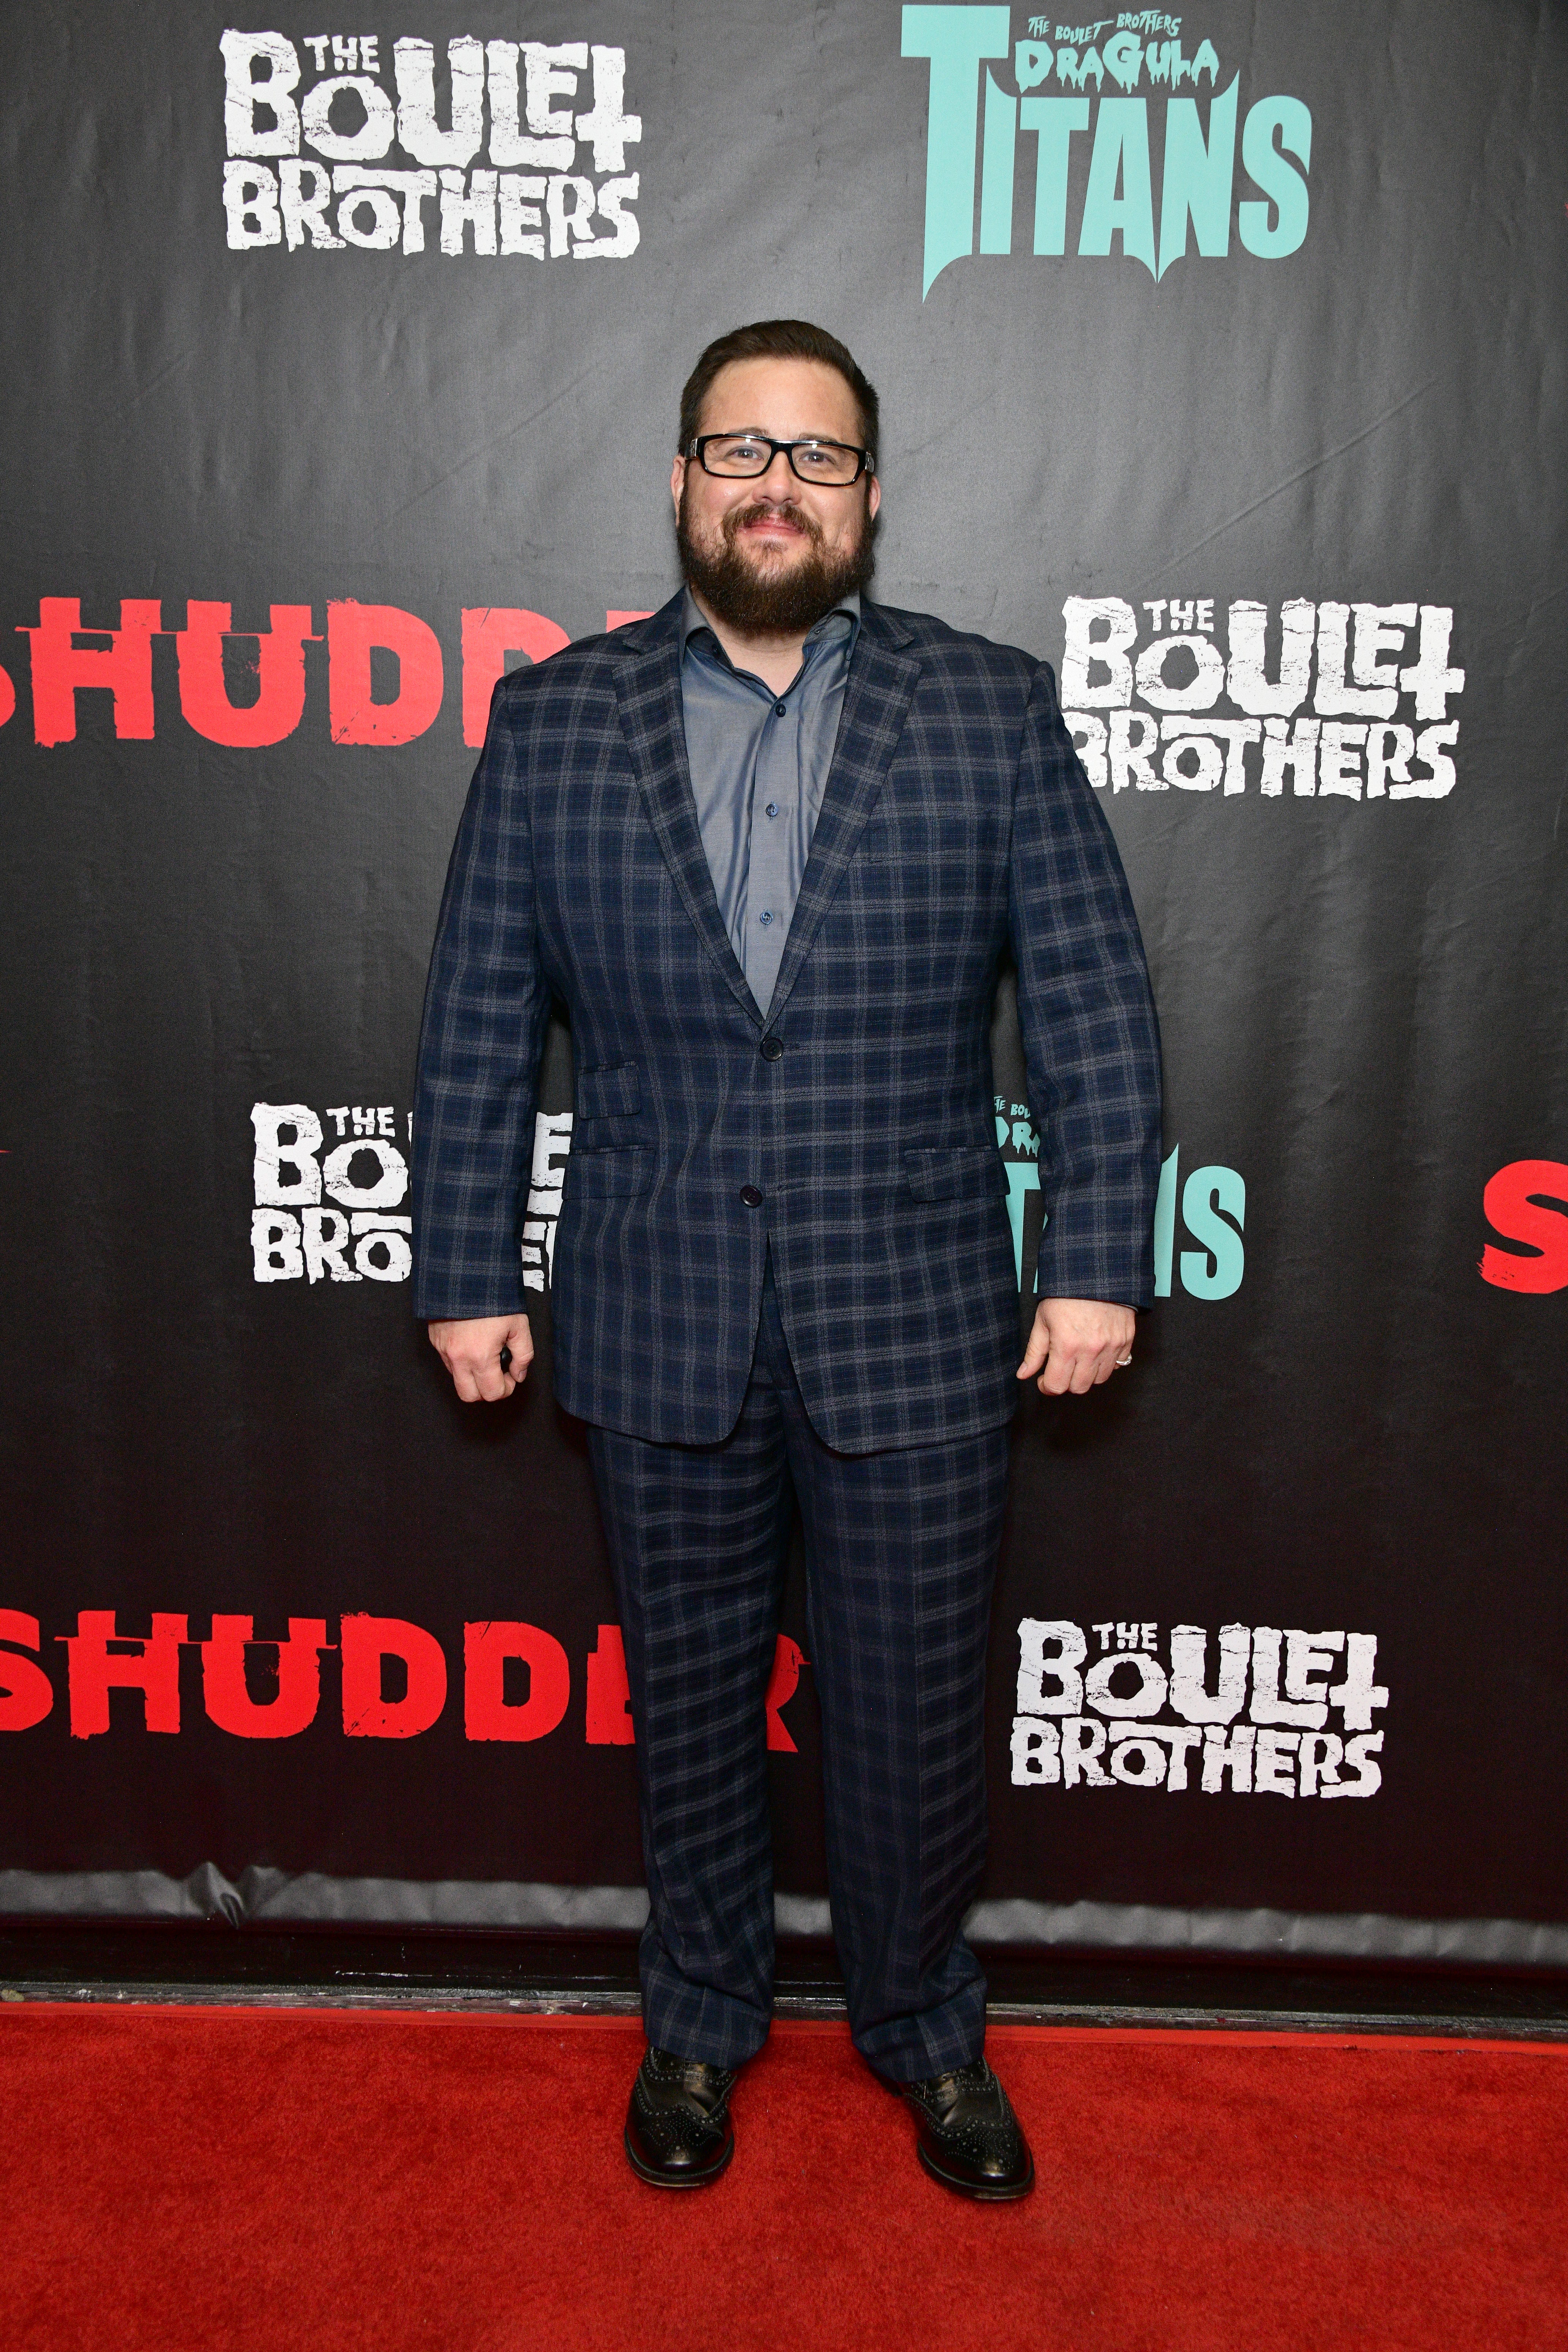 Chaz Bono at the Los Angeles premiere of "The Boulet Brothers' Dragula: Titans" in Hollywood, California, on October 24, 2022. | Source: Getty Images